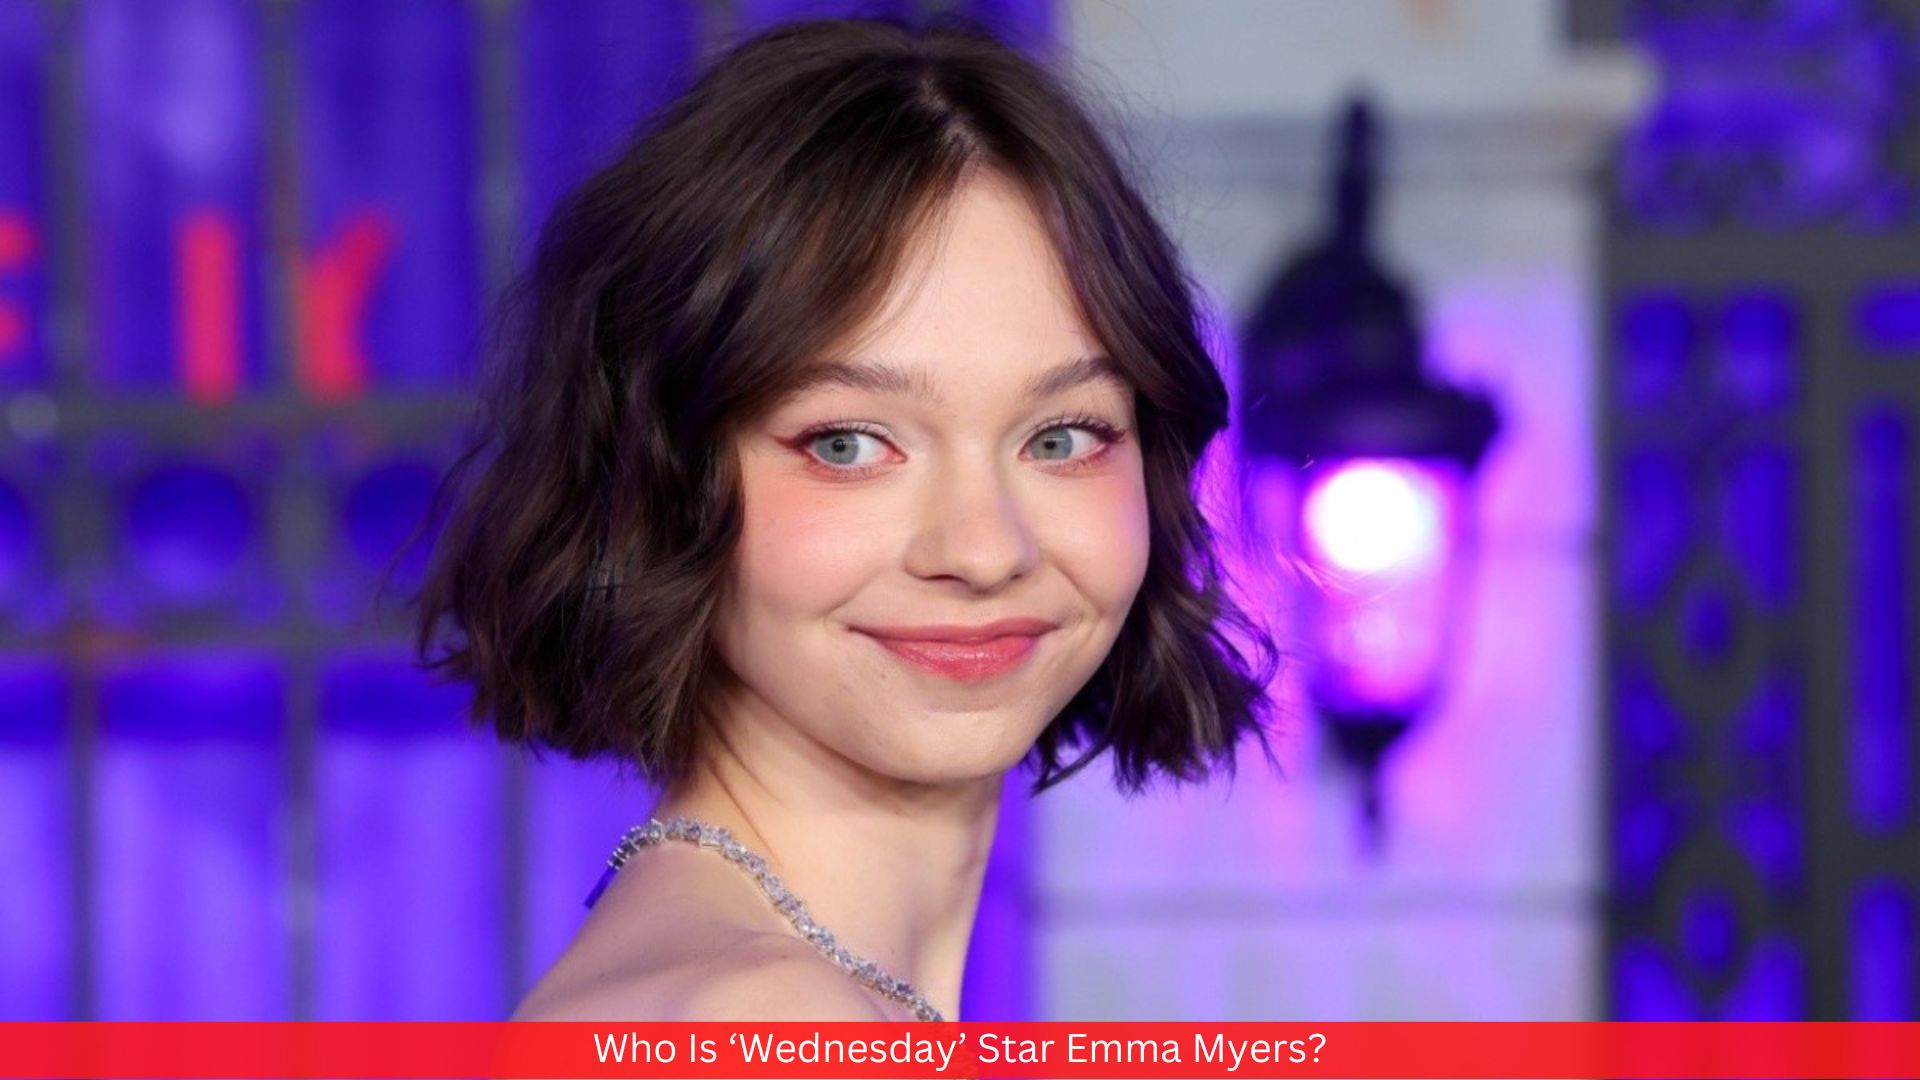 Who Is ‘Wednesday’ Star Emma Myers? Complete Information!